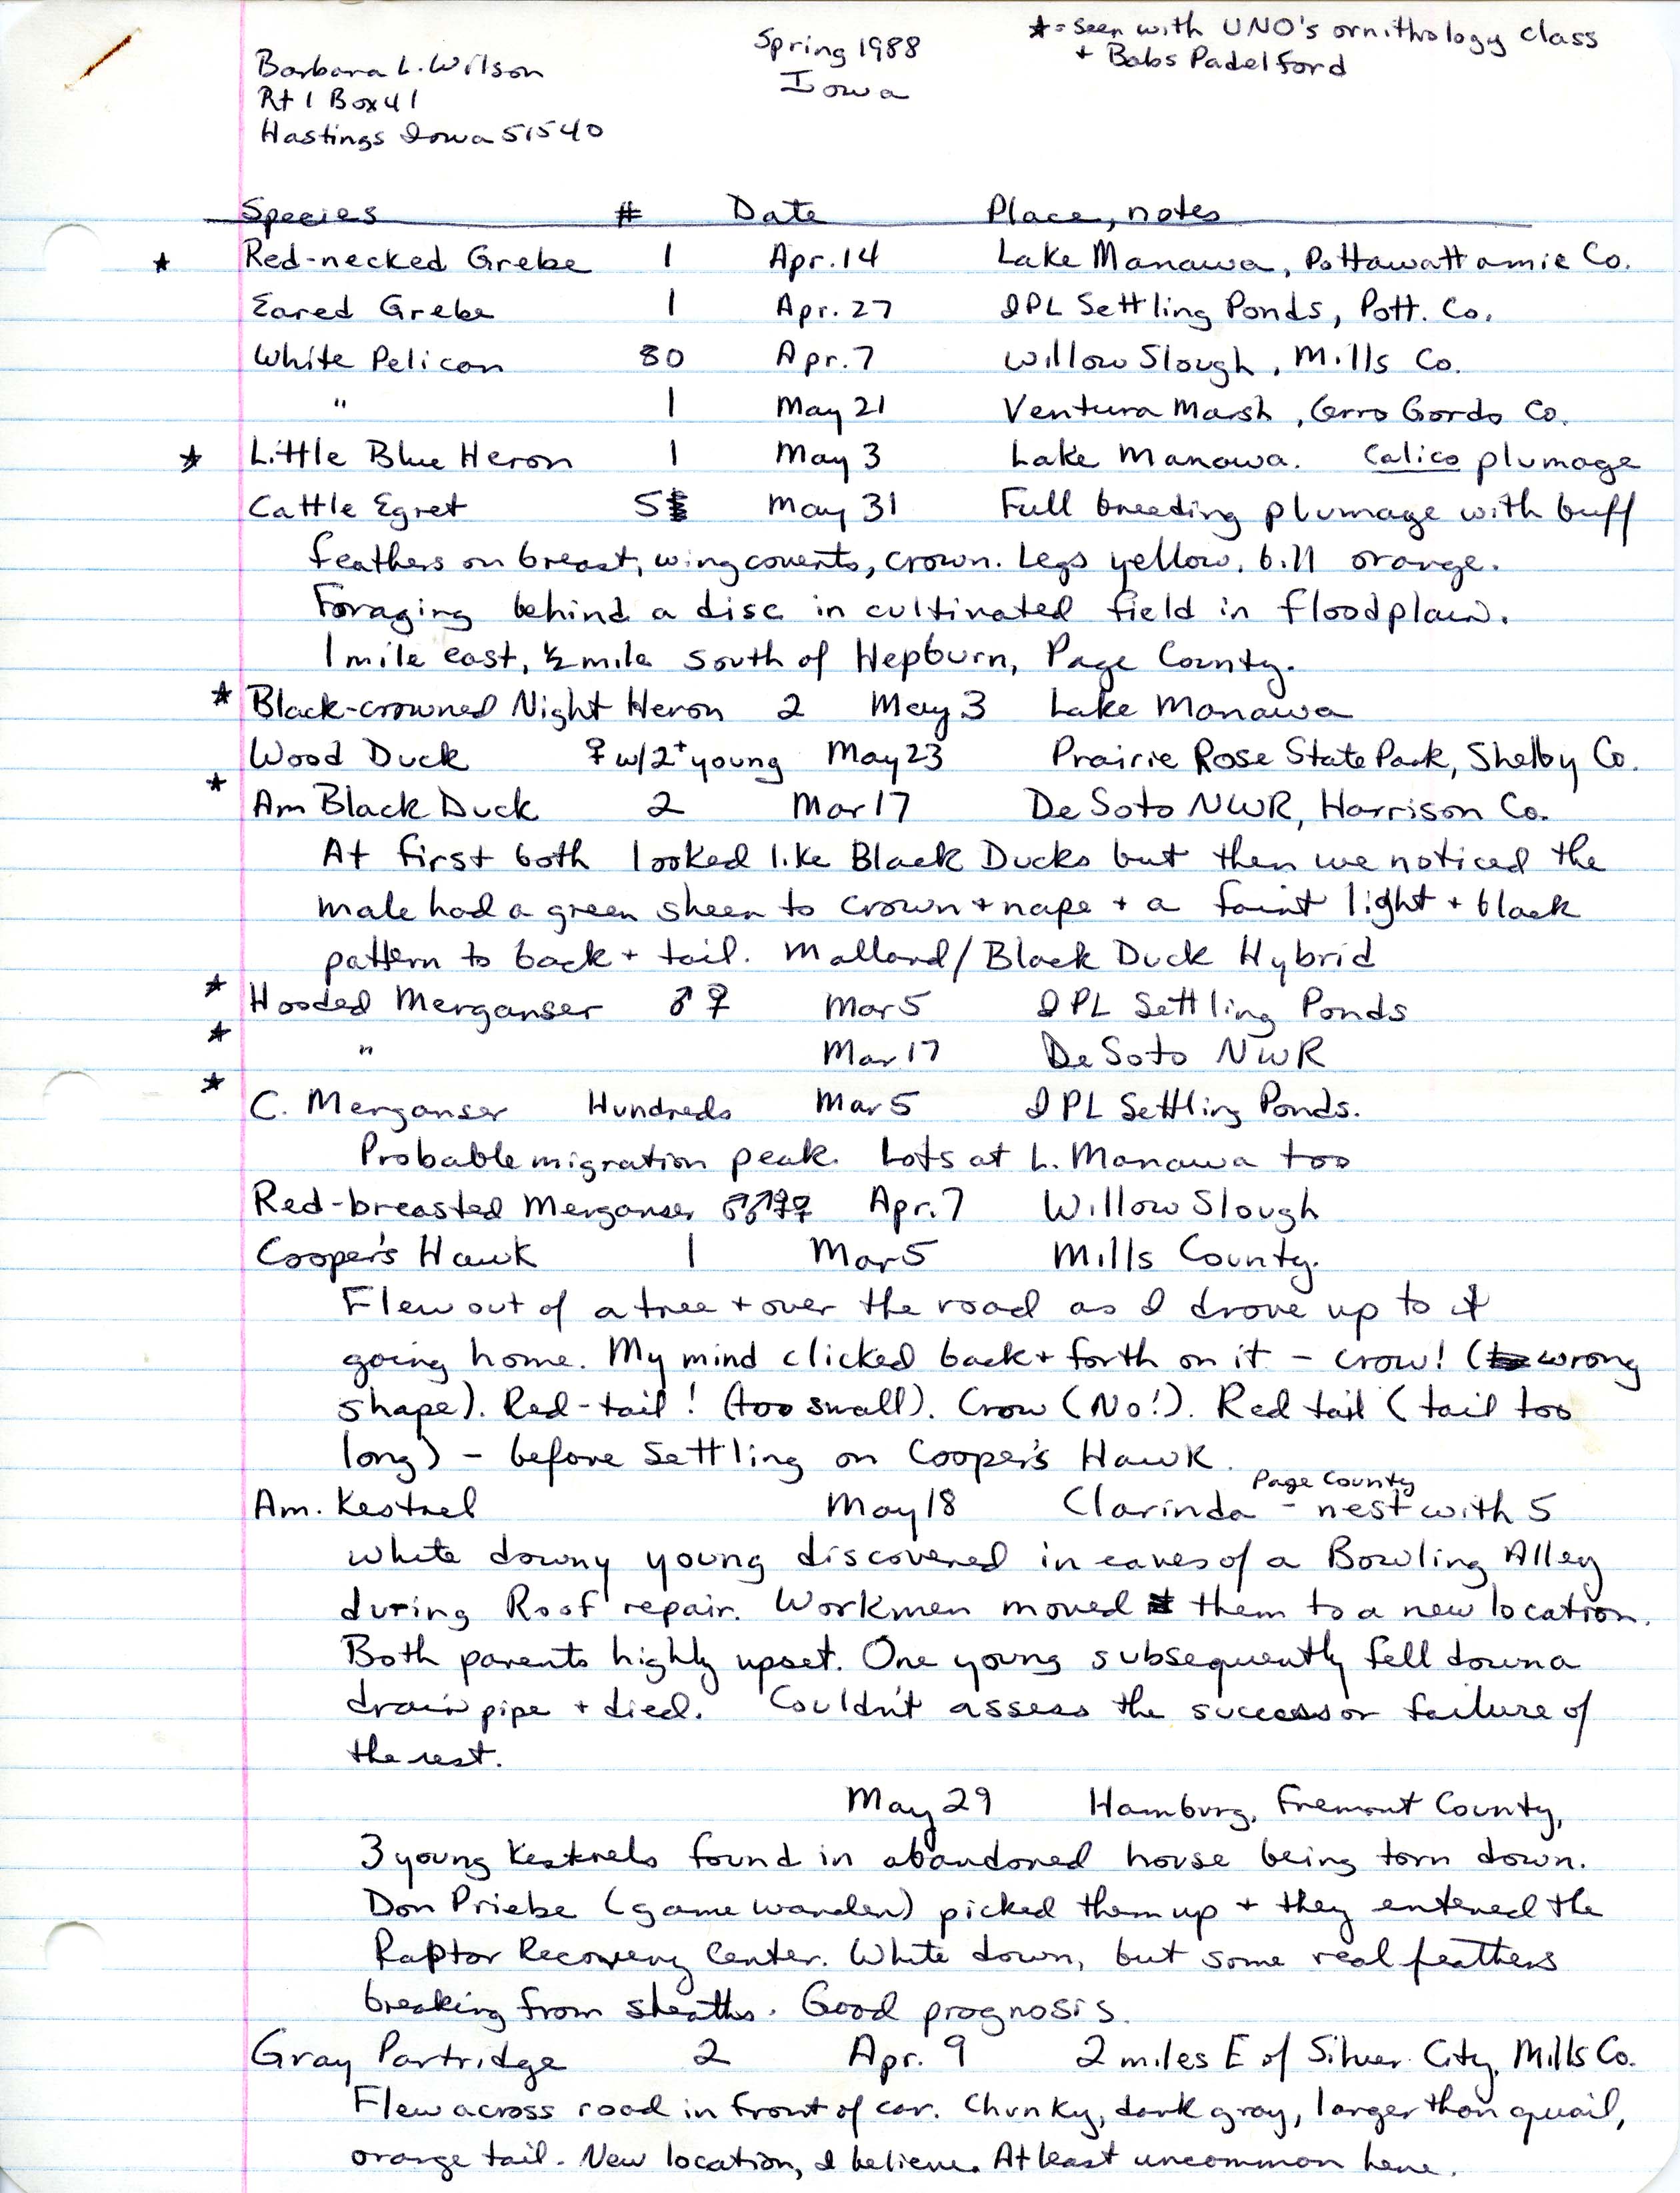 Field notes contributed by Barbara L. Wilson, spring 1988